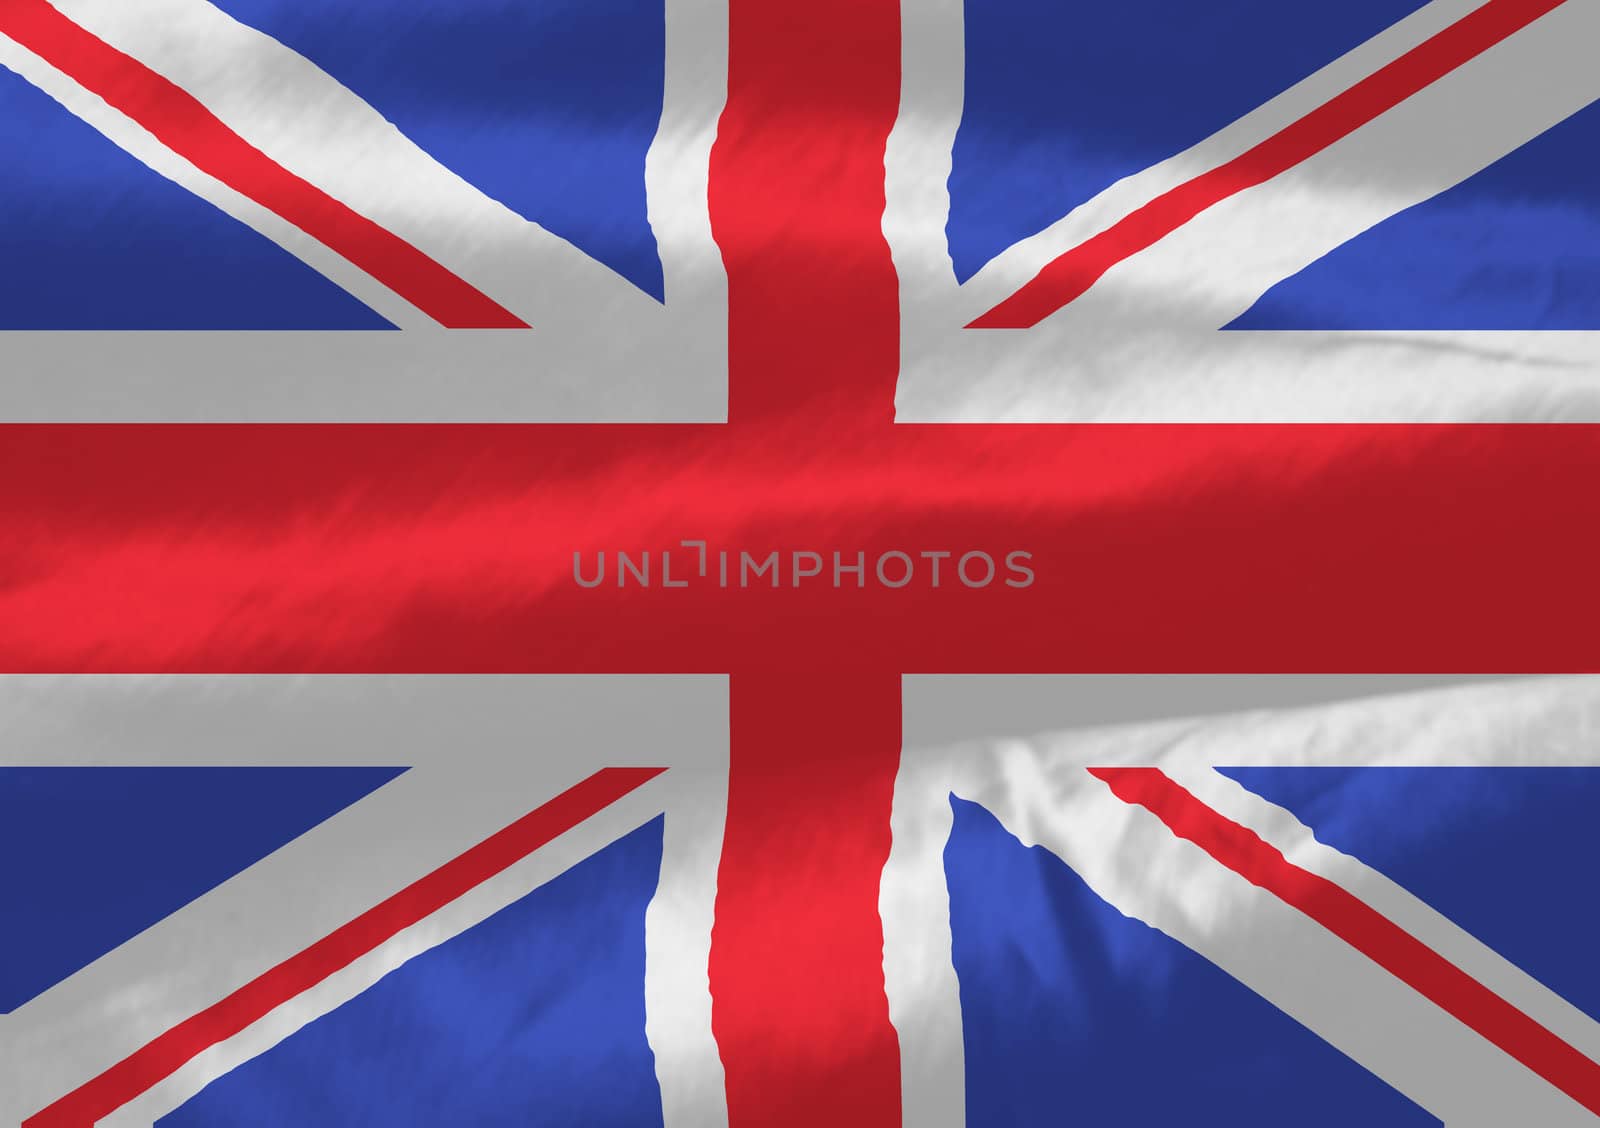 Illustrated version of the british flag ideal for a background